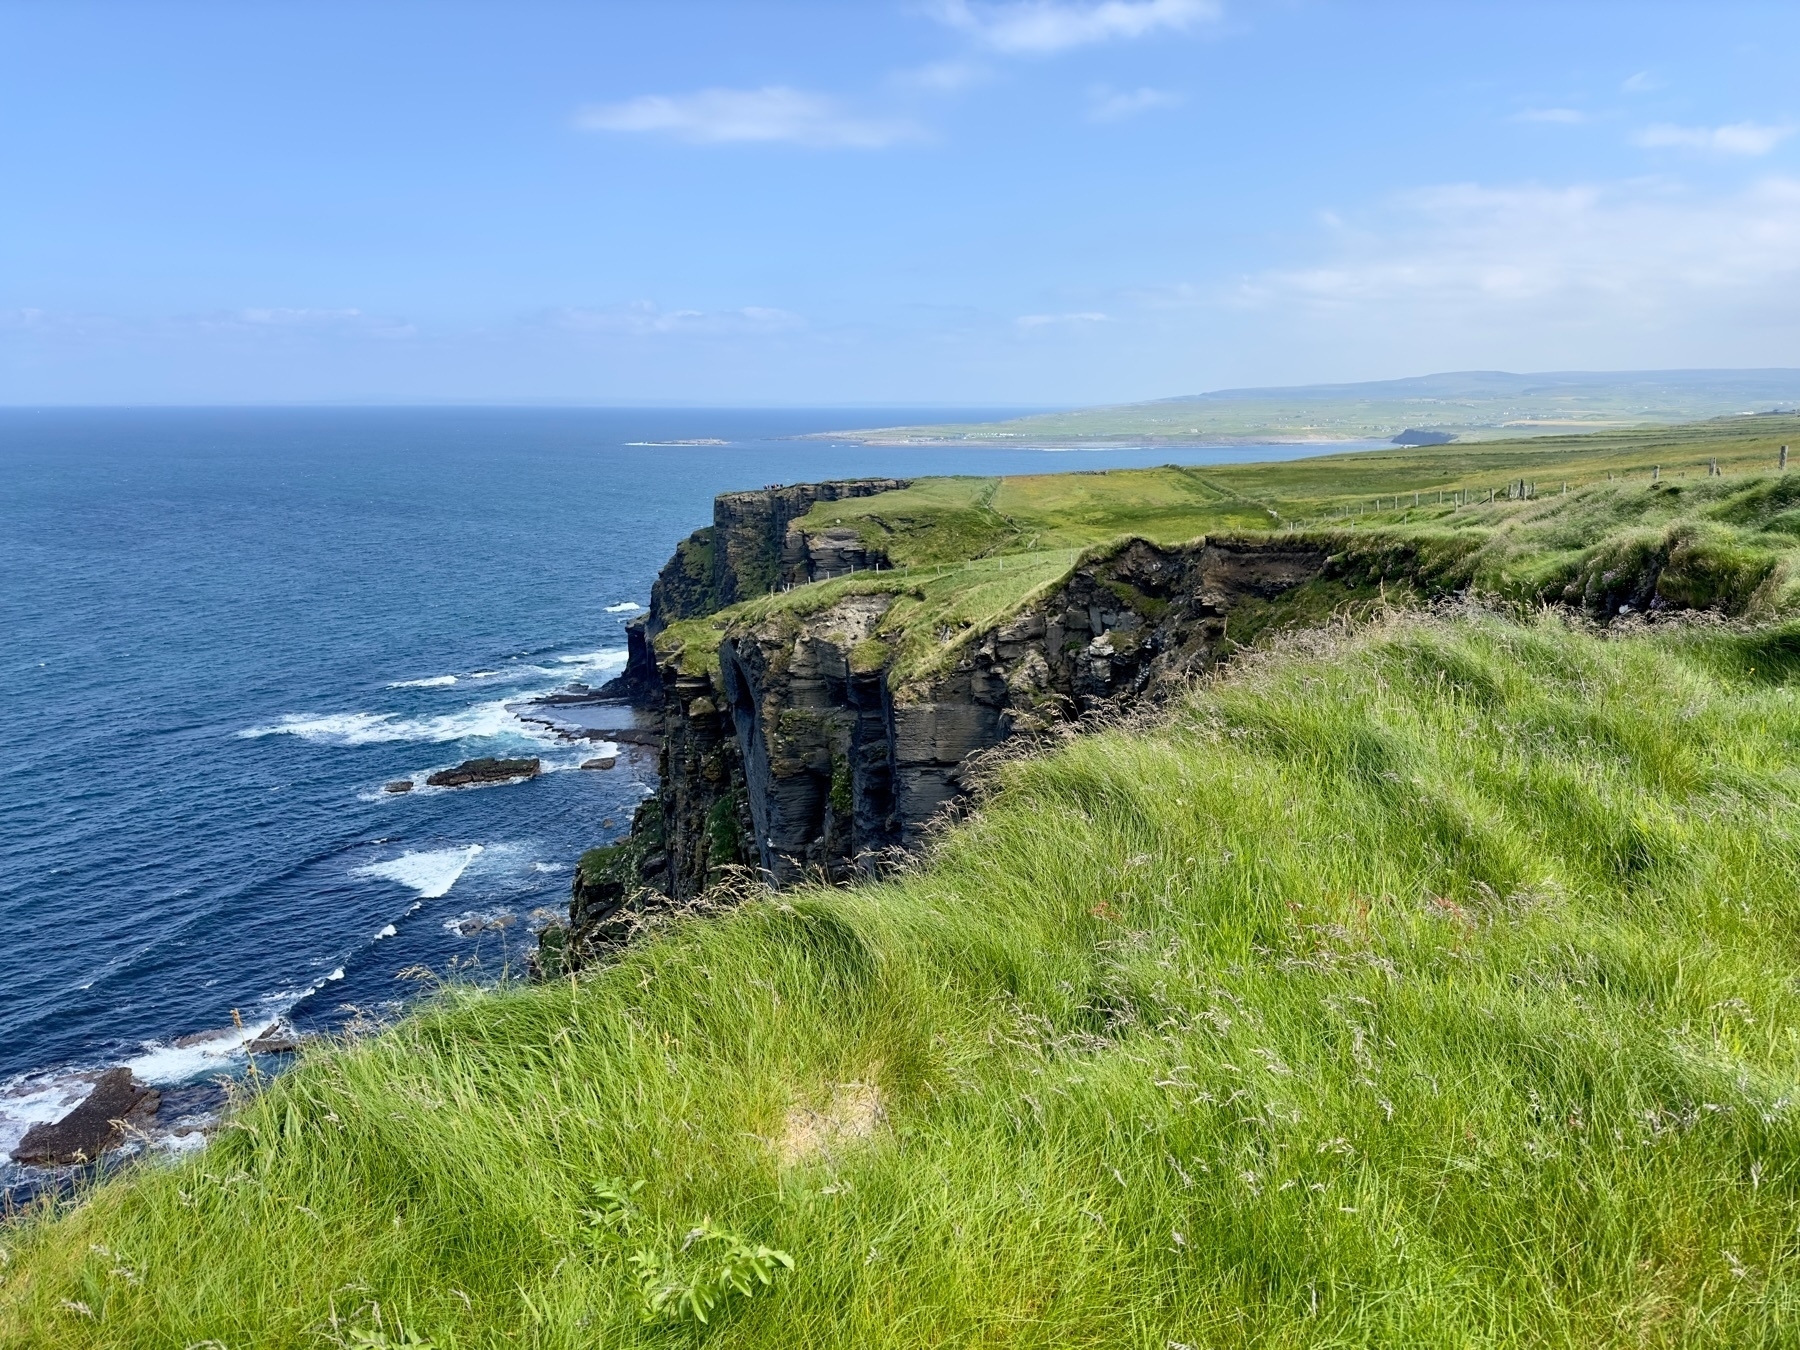 Auto-generated description: A coastal cliff with lush green grass overlooks a vast blue ocean under a clear sky.